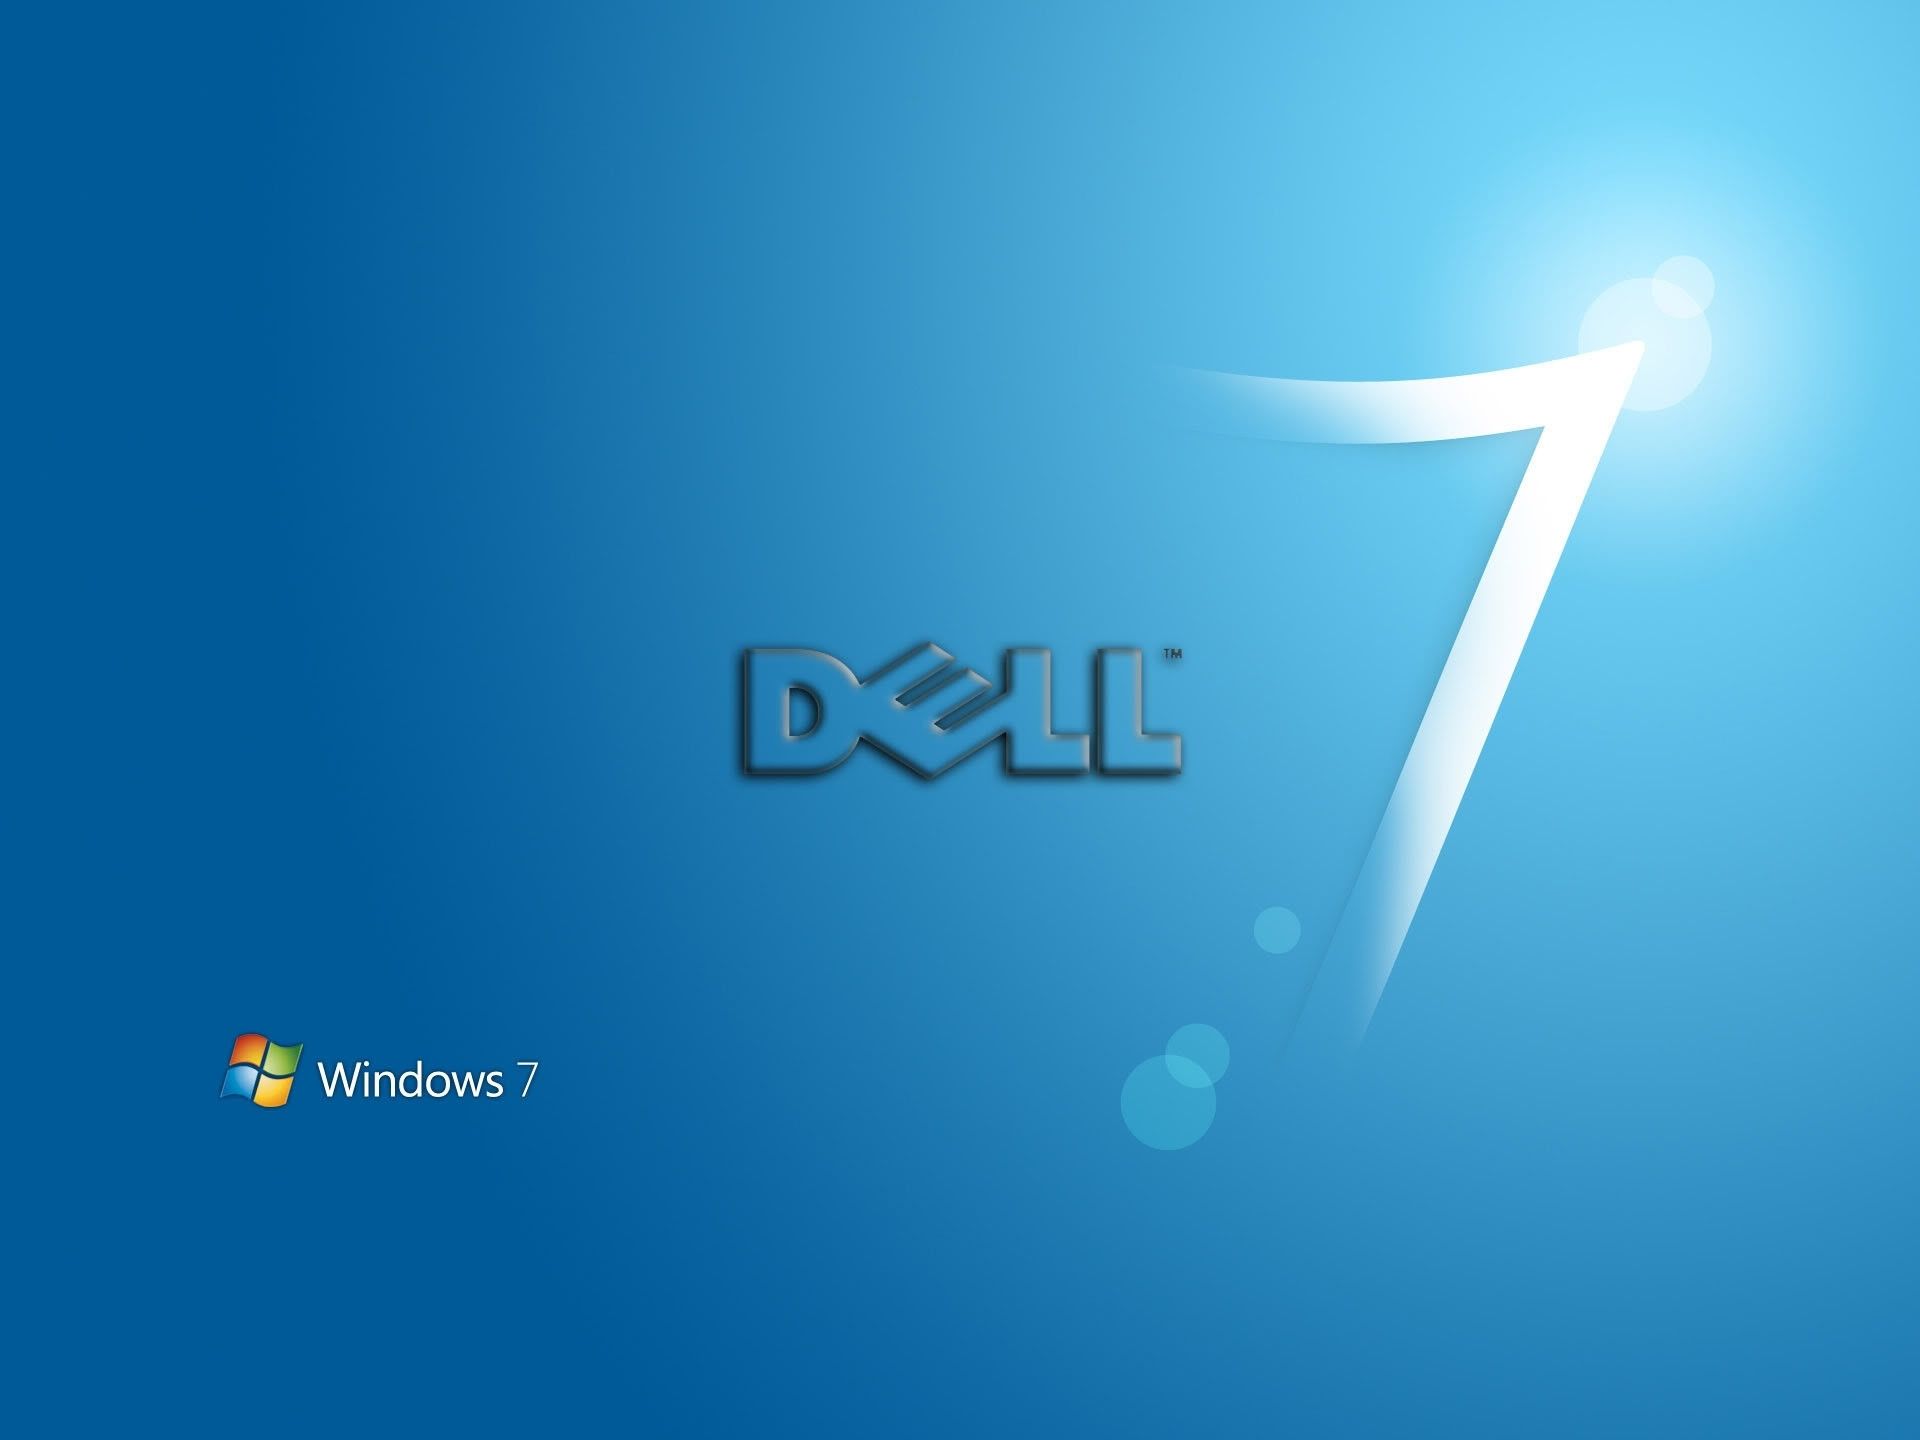 10 Best Dell Windows 7 Wallpaper FULL HD 1080p For PC Background 1920x1440